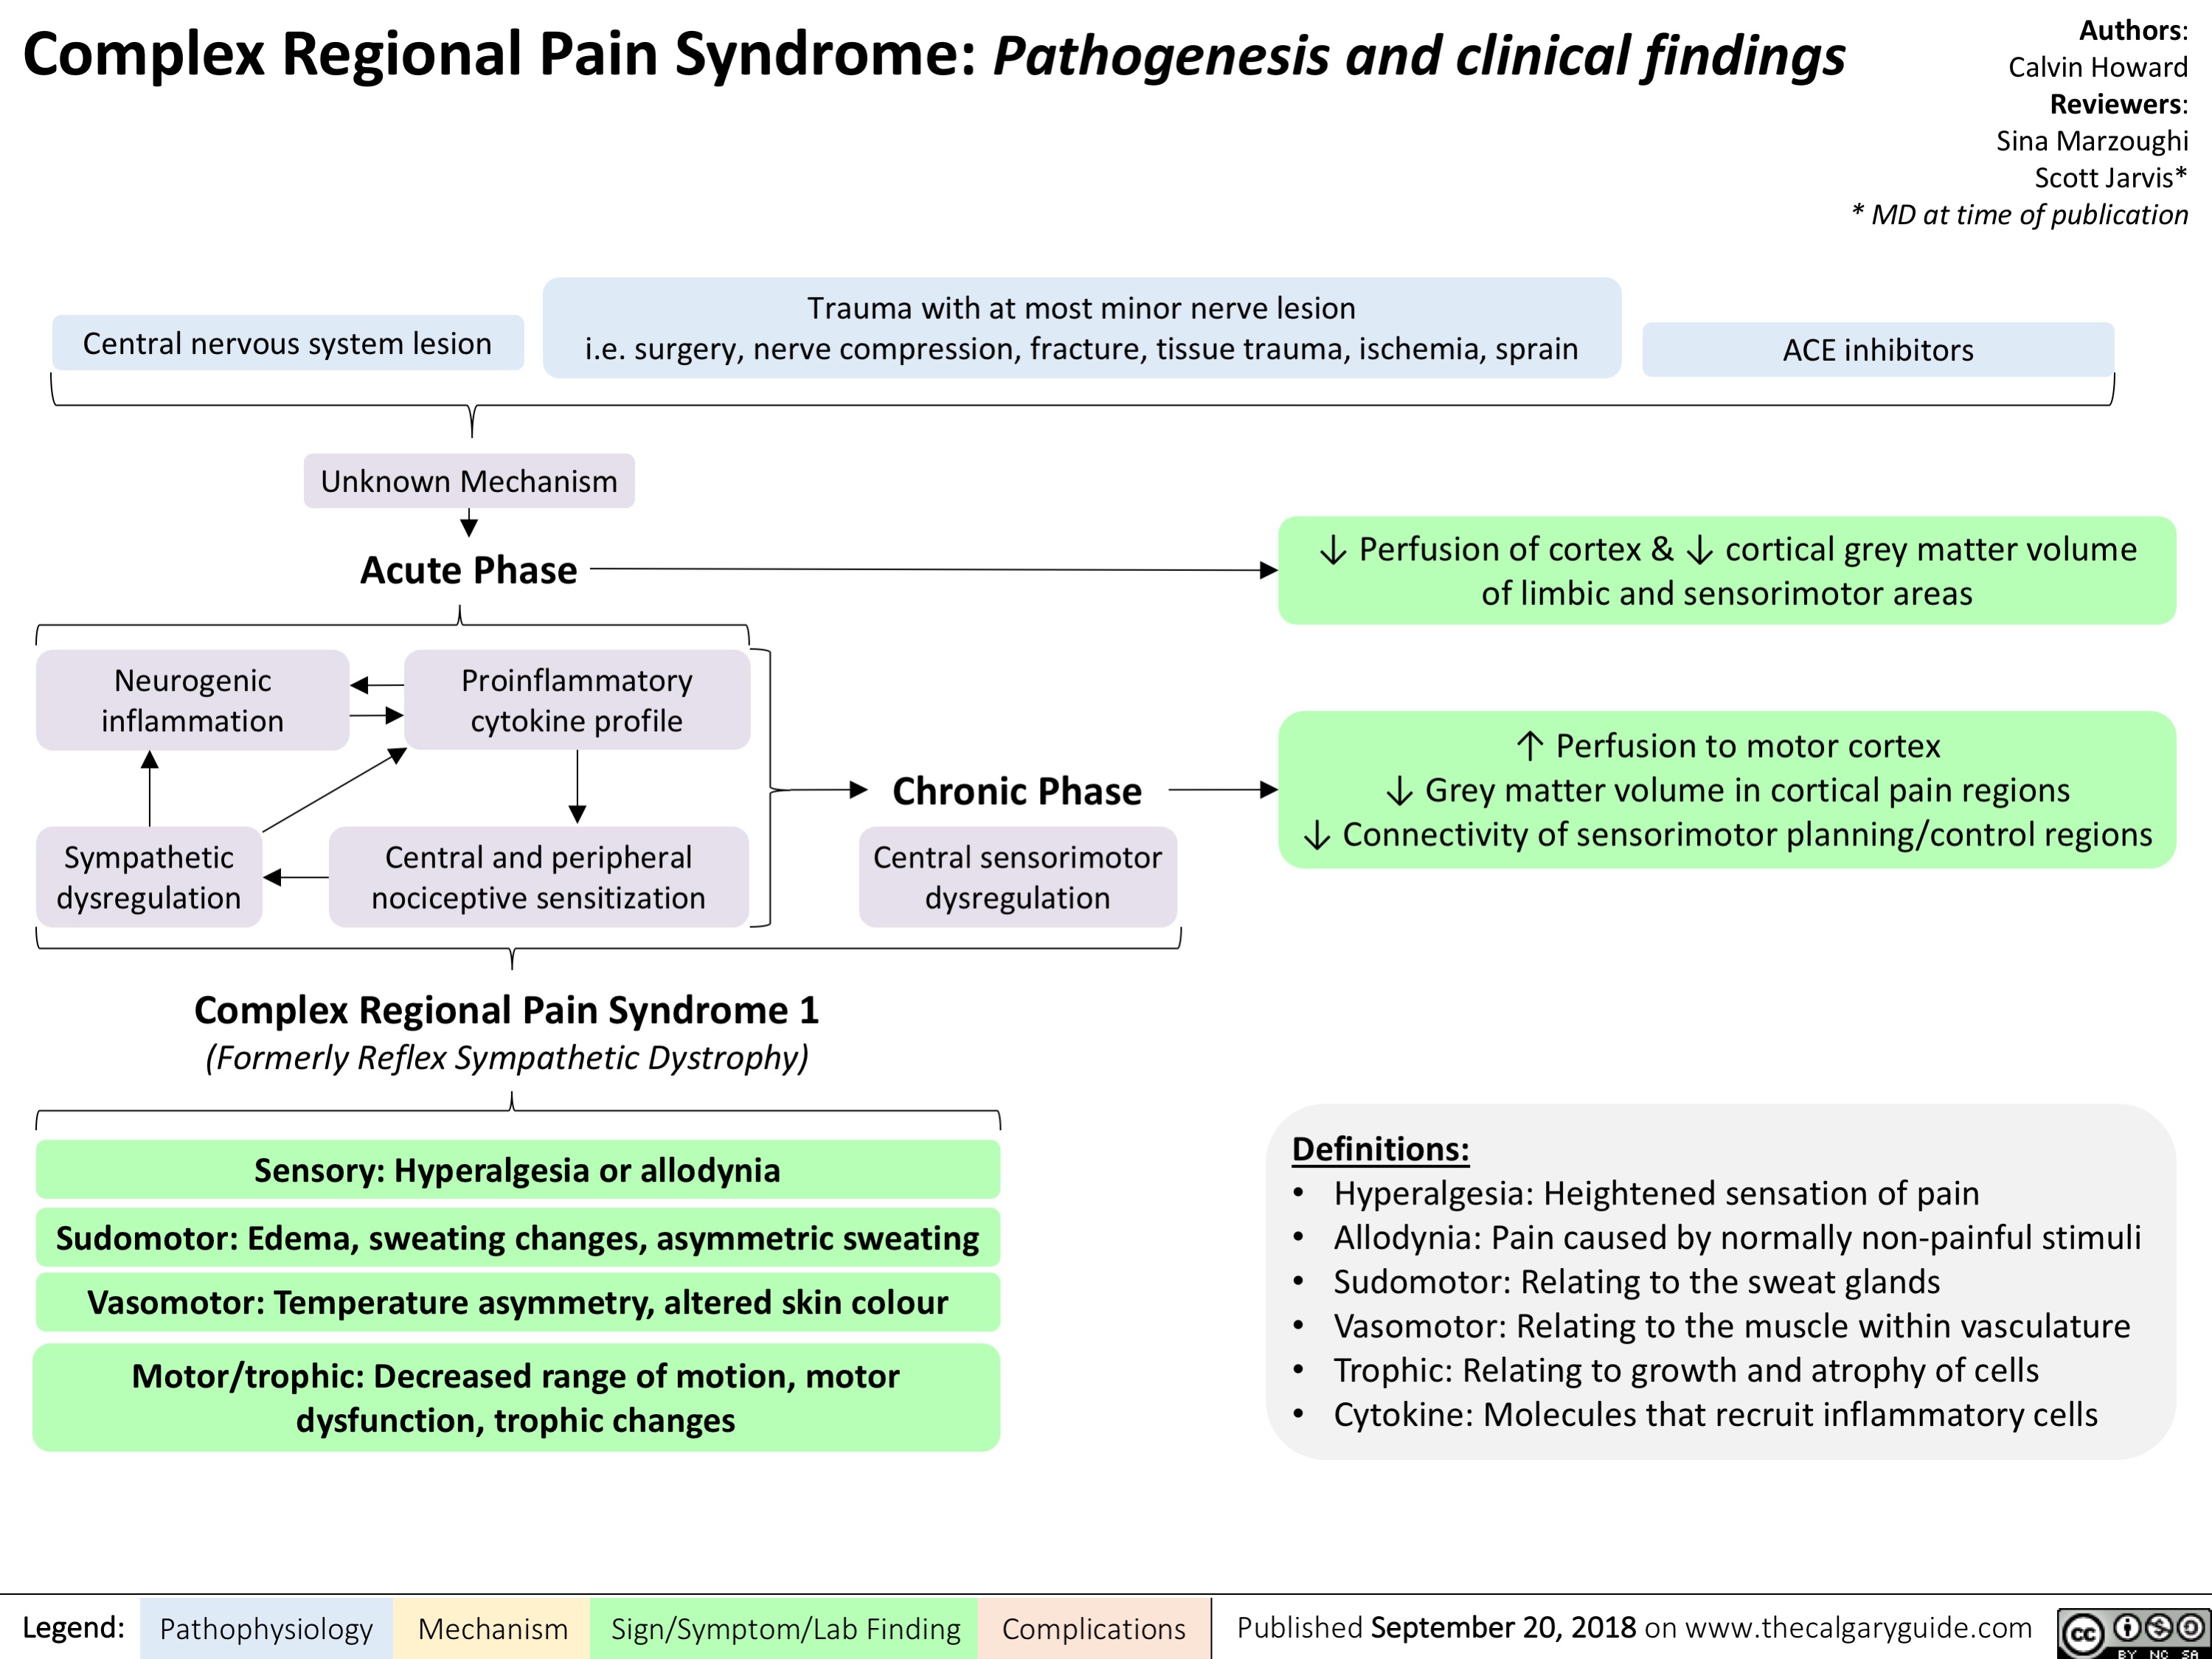 Complex Regional Pain Syndrome: Pathogenesis and clinical findings
Authors: Calvin Howard Reviewers: Sina Marzoughi Scott Jarvis* * MD at time of publication
 Central nervous system lesion Unknown Mechanism
ACE inhibitors
Trauma with at most minor nerve lesion
i.e. surgery, nerve compression, fracture, tissue trauma, ischemia, sprain
           Neurogenic inflammation
Sympathetic dysregulation
Acute Phase
Proinflammatory cytokine profile
Central and peripheral nociceptive sensitization
Chronic Phase
Central sensorimotor dysregulation
↓ Perfusion of cortex & ↓ cortical grey matter volume of limbic and sensorimotor areas
↑ Perfusion to motor cortex
↓ Grey matter volume in cortical pain regions
↓ Connectivity of sensorimotor planning/control regions
             Complex Regional Pain Syndrome 1
(Formerly Reflex Sympathetic Dystrophy)
   Sensory: Hyperalgesia or allodynia
Sudomotor: Edema, sweating changes, asymmetric sweating Vasomotor: Temperature asymmetry, altered skin colour
Motor/trophic: Decreased range of motion, motor dysfunction, trophic changes
Definitions:
• Hyperalgesia: Heightened sensation of pain
• Allodynia: Pain caused by normally non-painful stimuli • Sudomotor: Relating to the sweat glands
• Vasomotor: Relating to the muscle within vasculature • Trophic: Relating to growth and atrophy of cells
• Cytokine: Molecules that recruit inflammatory cells
     Legend:
 Pathophysiology
 Mechanism
Sign/Symptom/Lab Finding
  Complications
Published September 20, 2018 on www.thecalgaryguide.com
   